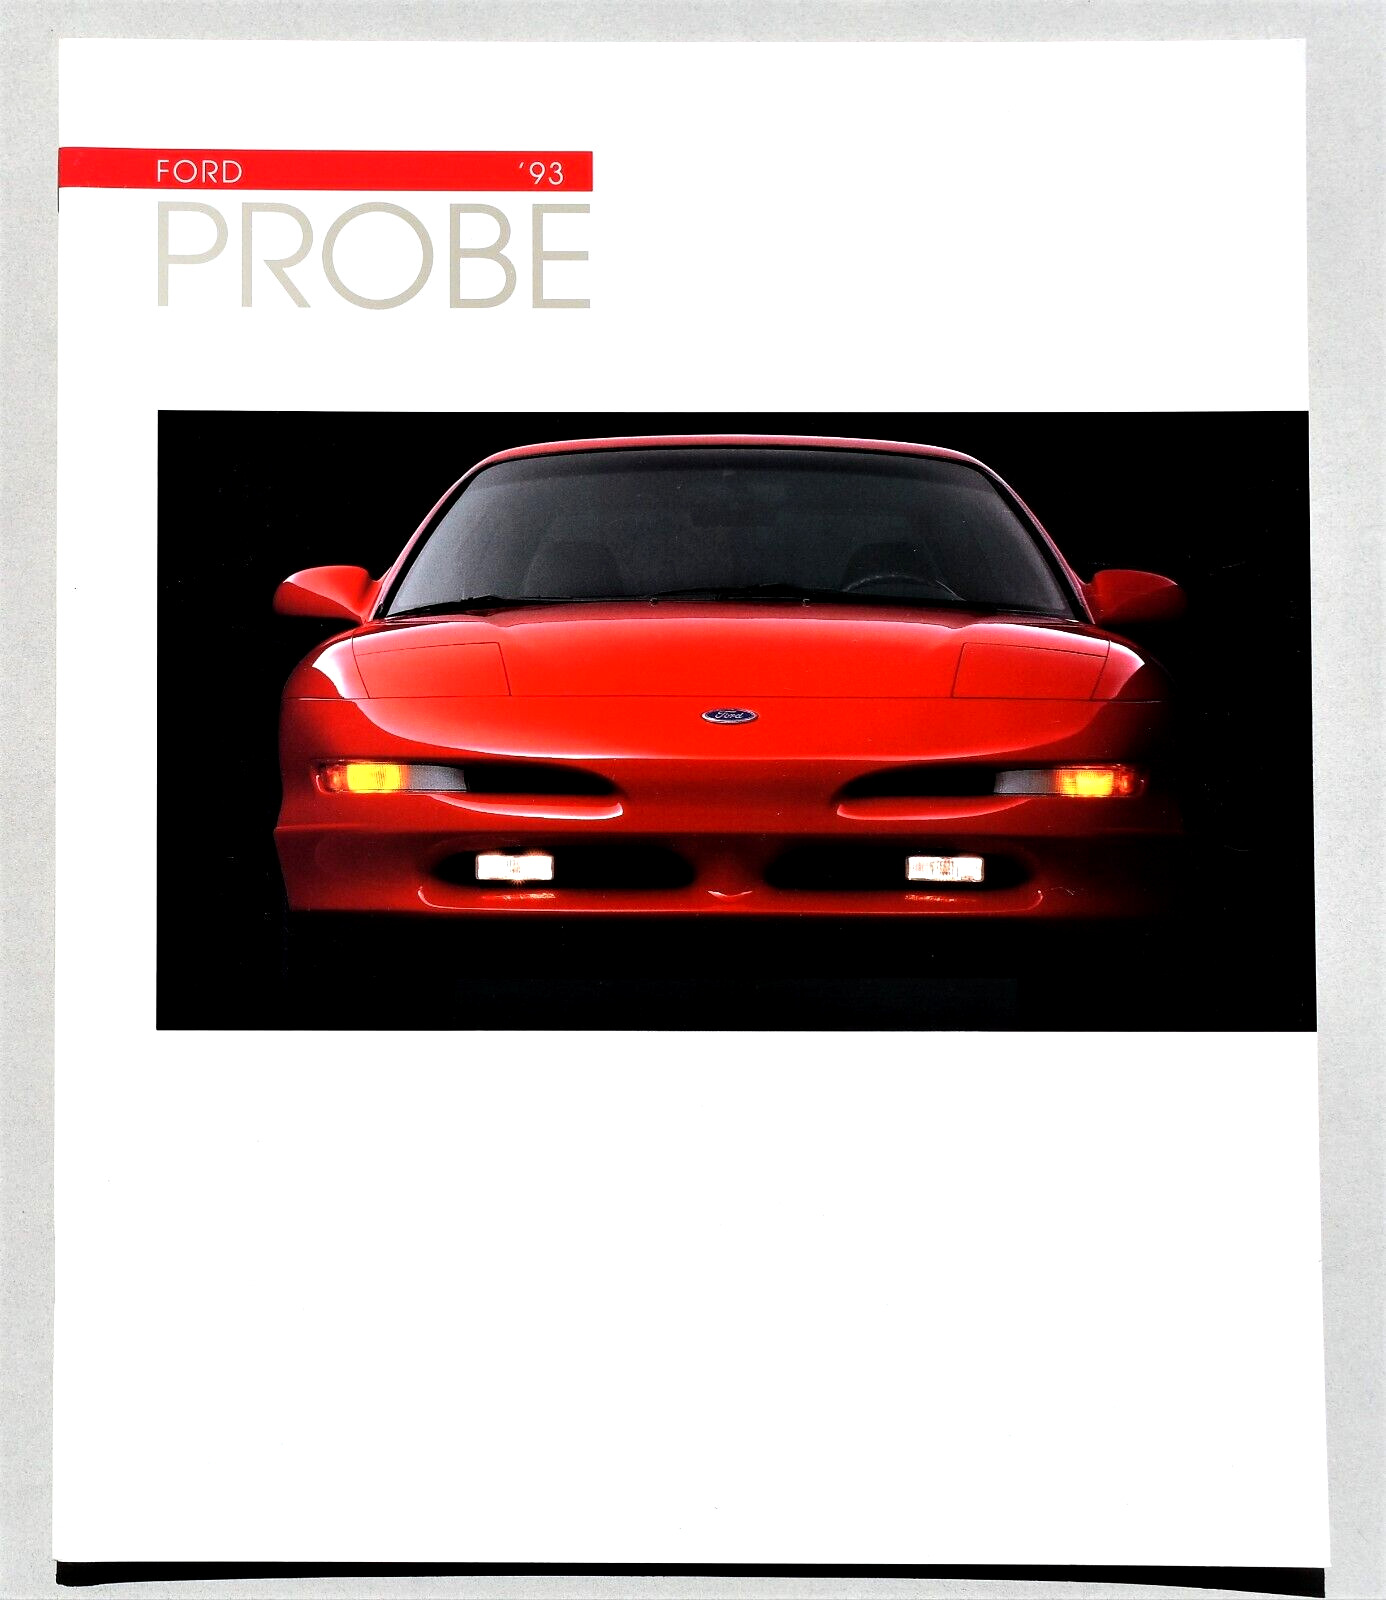 1993 FORD PROBE SALES BROCHURE CATALOG ~ 22 PAGES